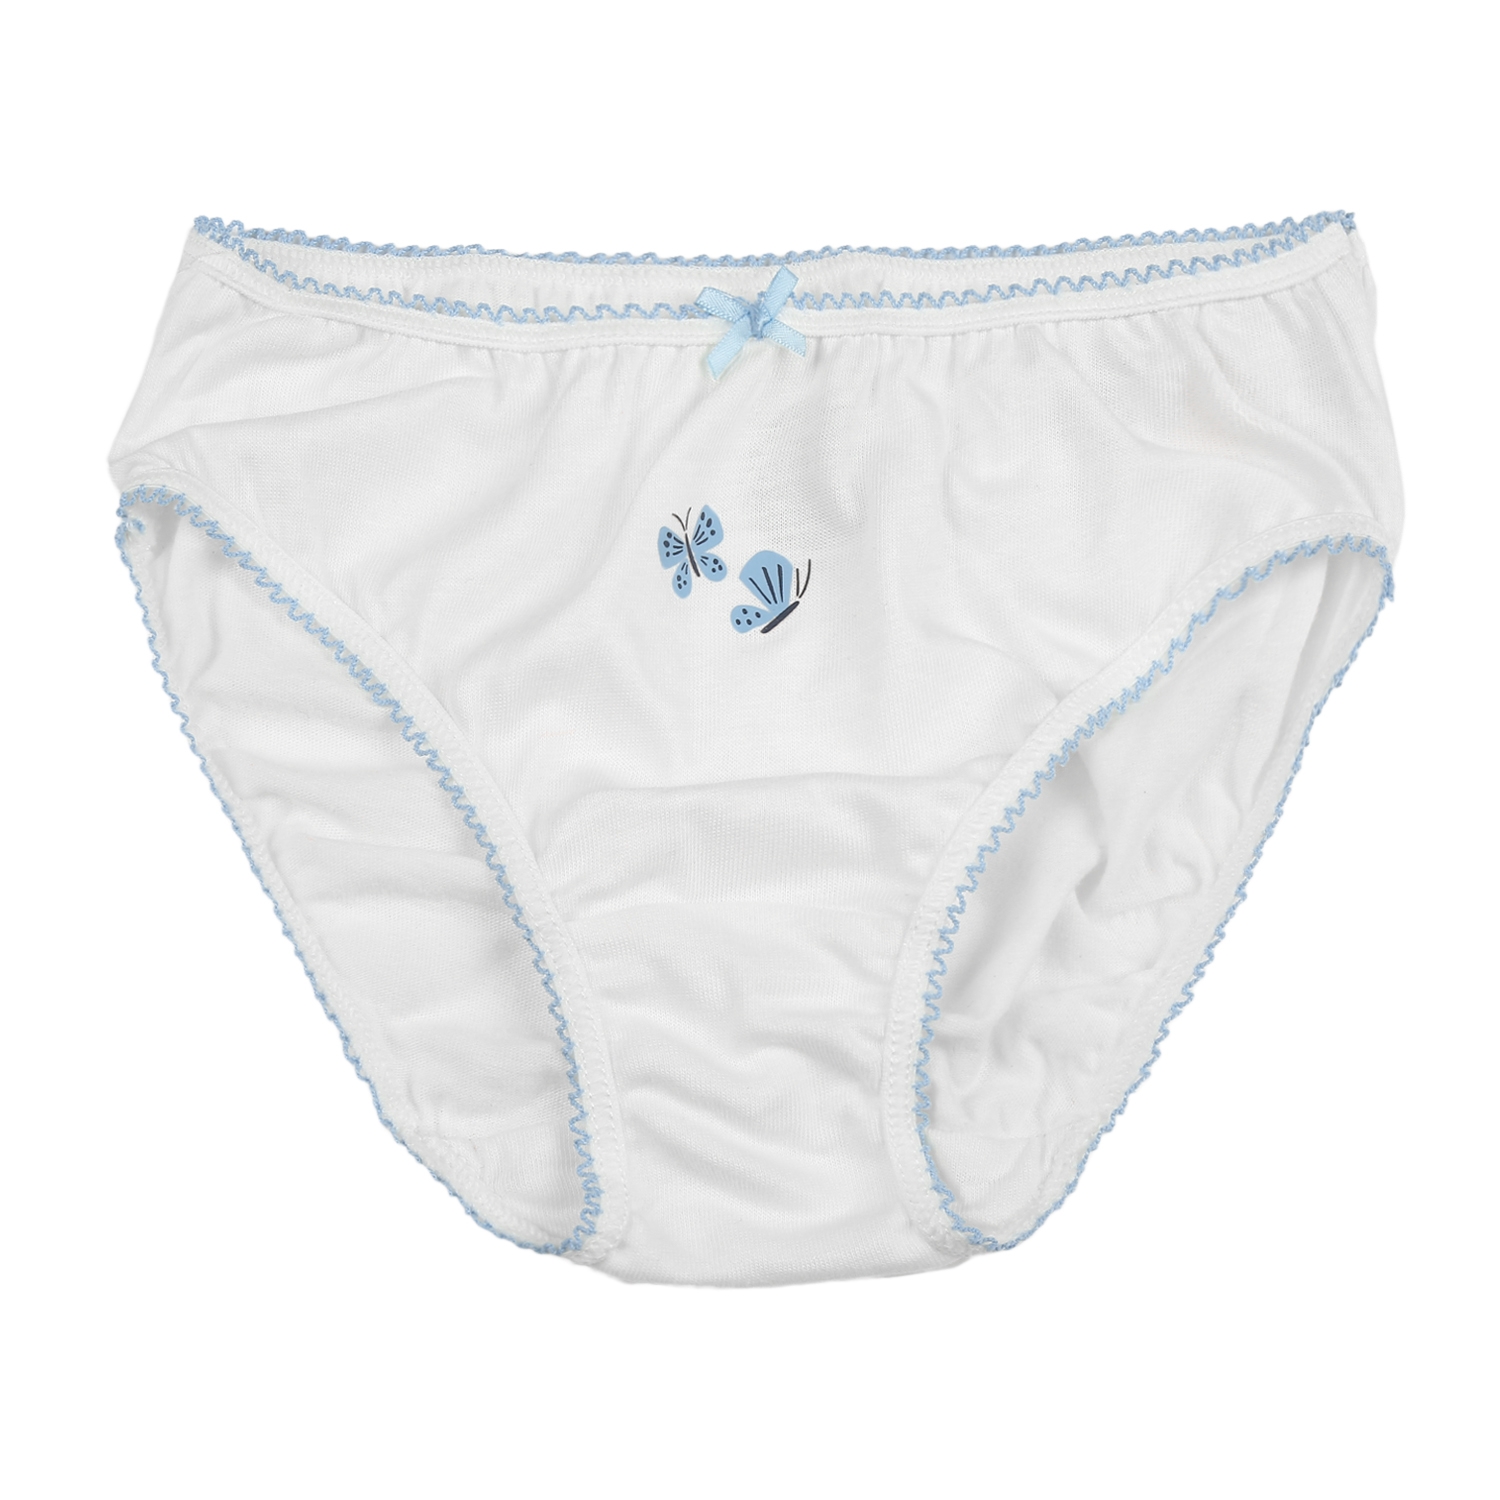 Mothercare | Girls Floral print Briefs - Pack of 3 - Blue white 4